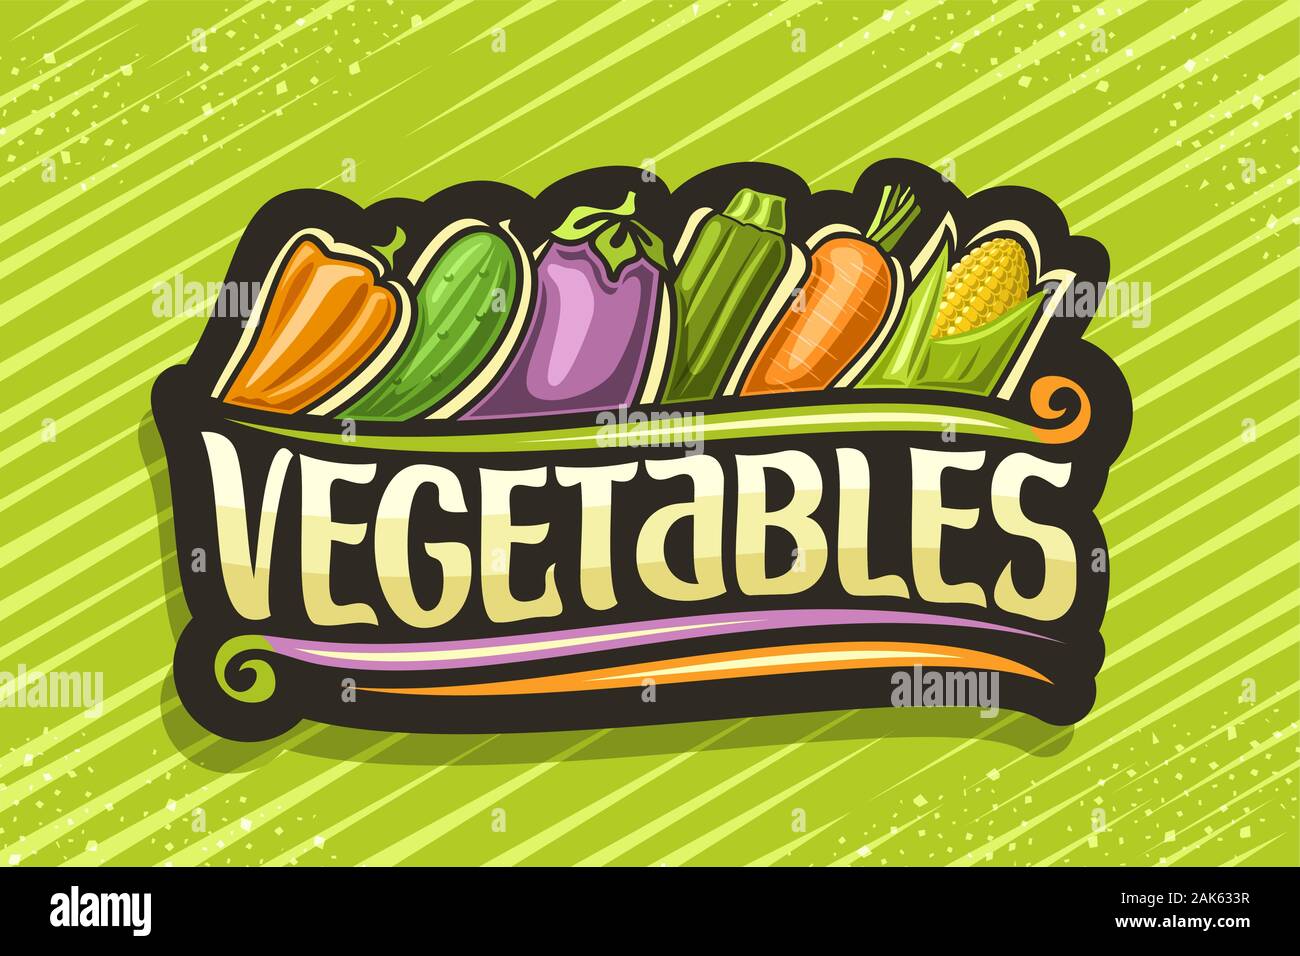 Vector logo for Fresh Vegetables, black sticker with illustration of cartoon raw veggies in a row, decorative signboard with original brush type for w Stock Vector